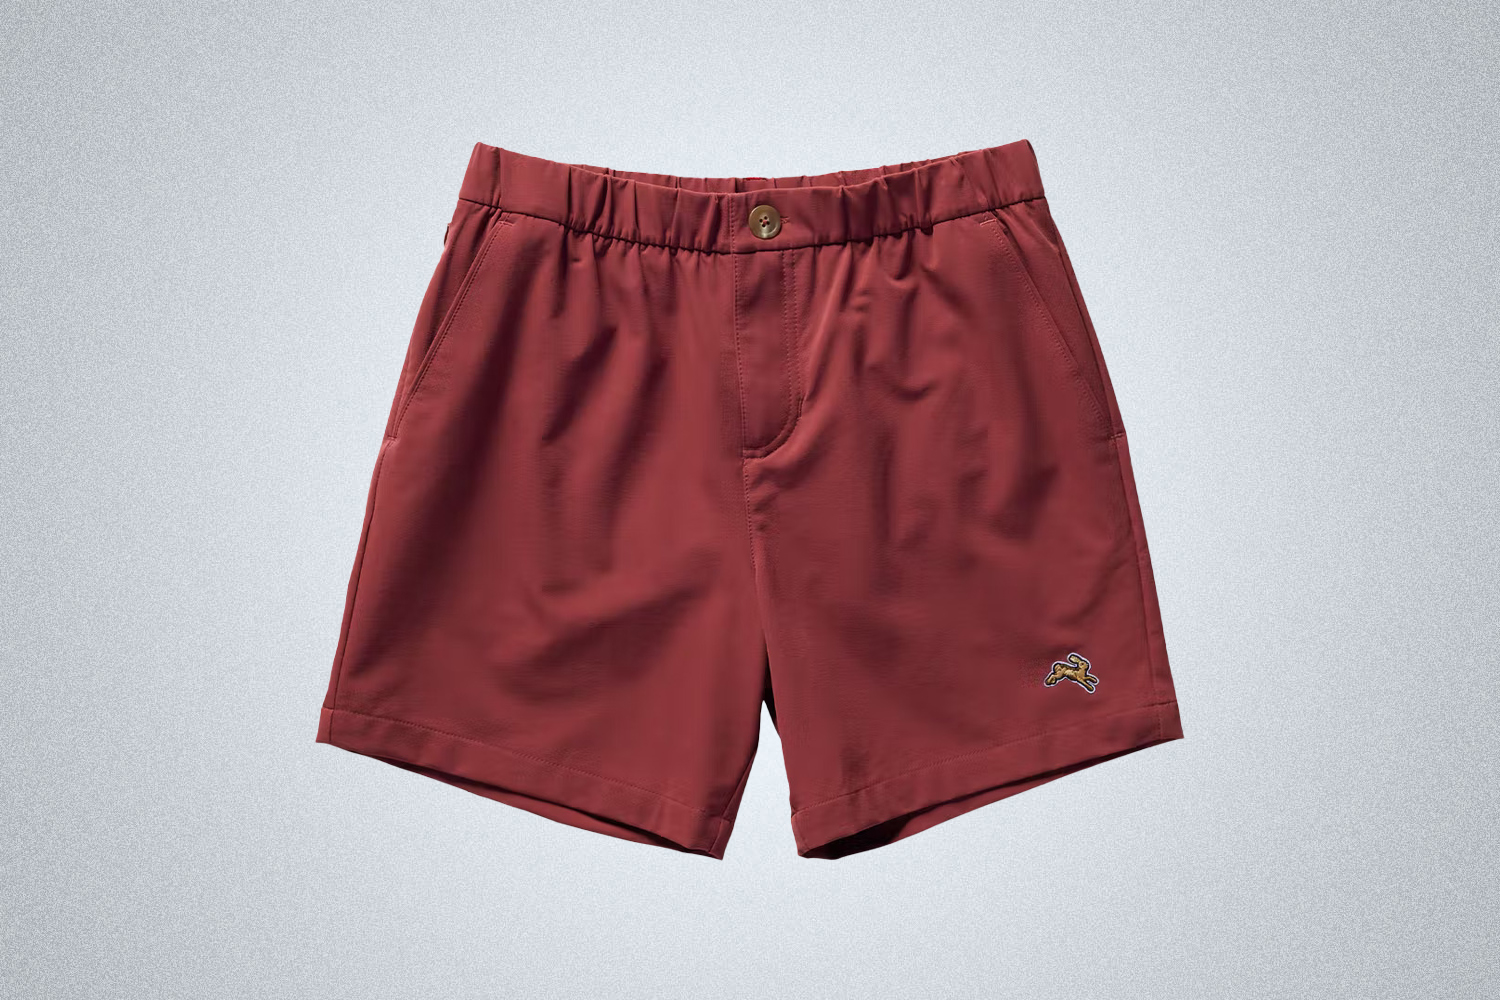 The Tracksmith Falmouth Shorts are some of the best shorts in 2022 for short guys